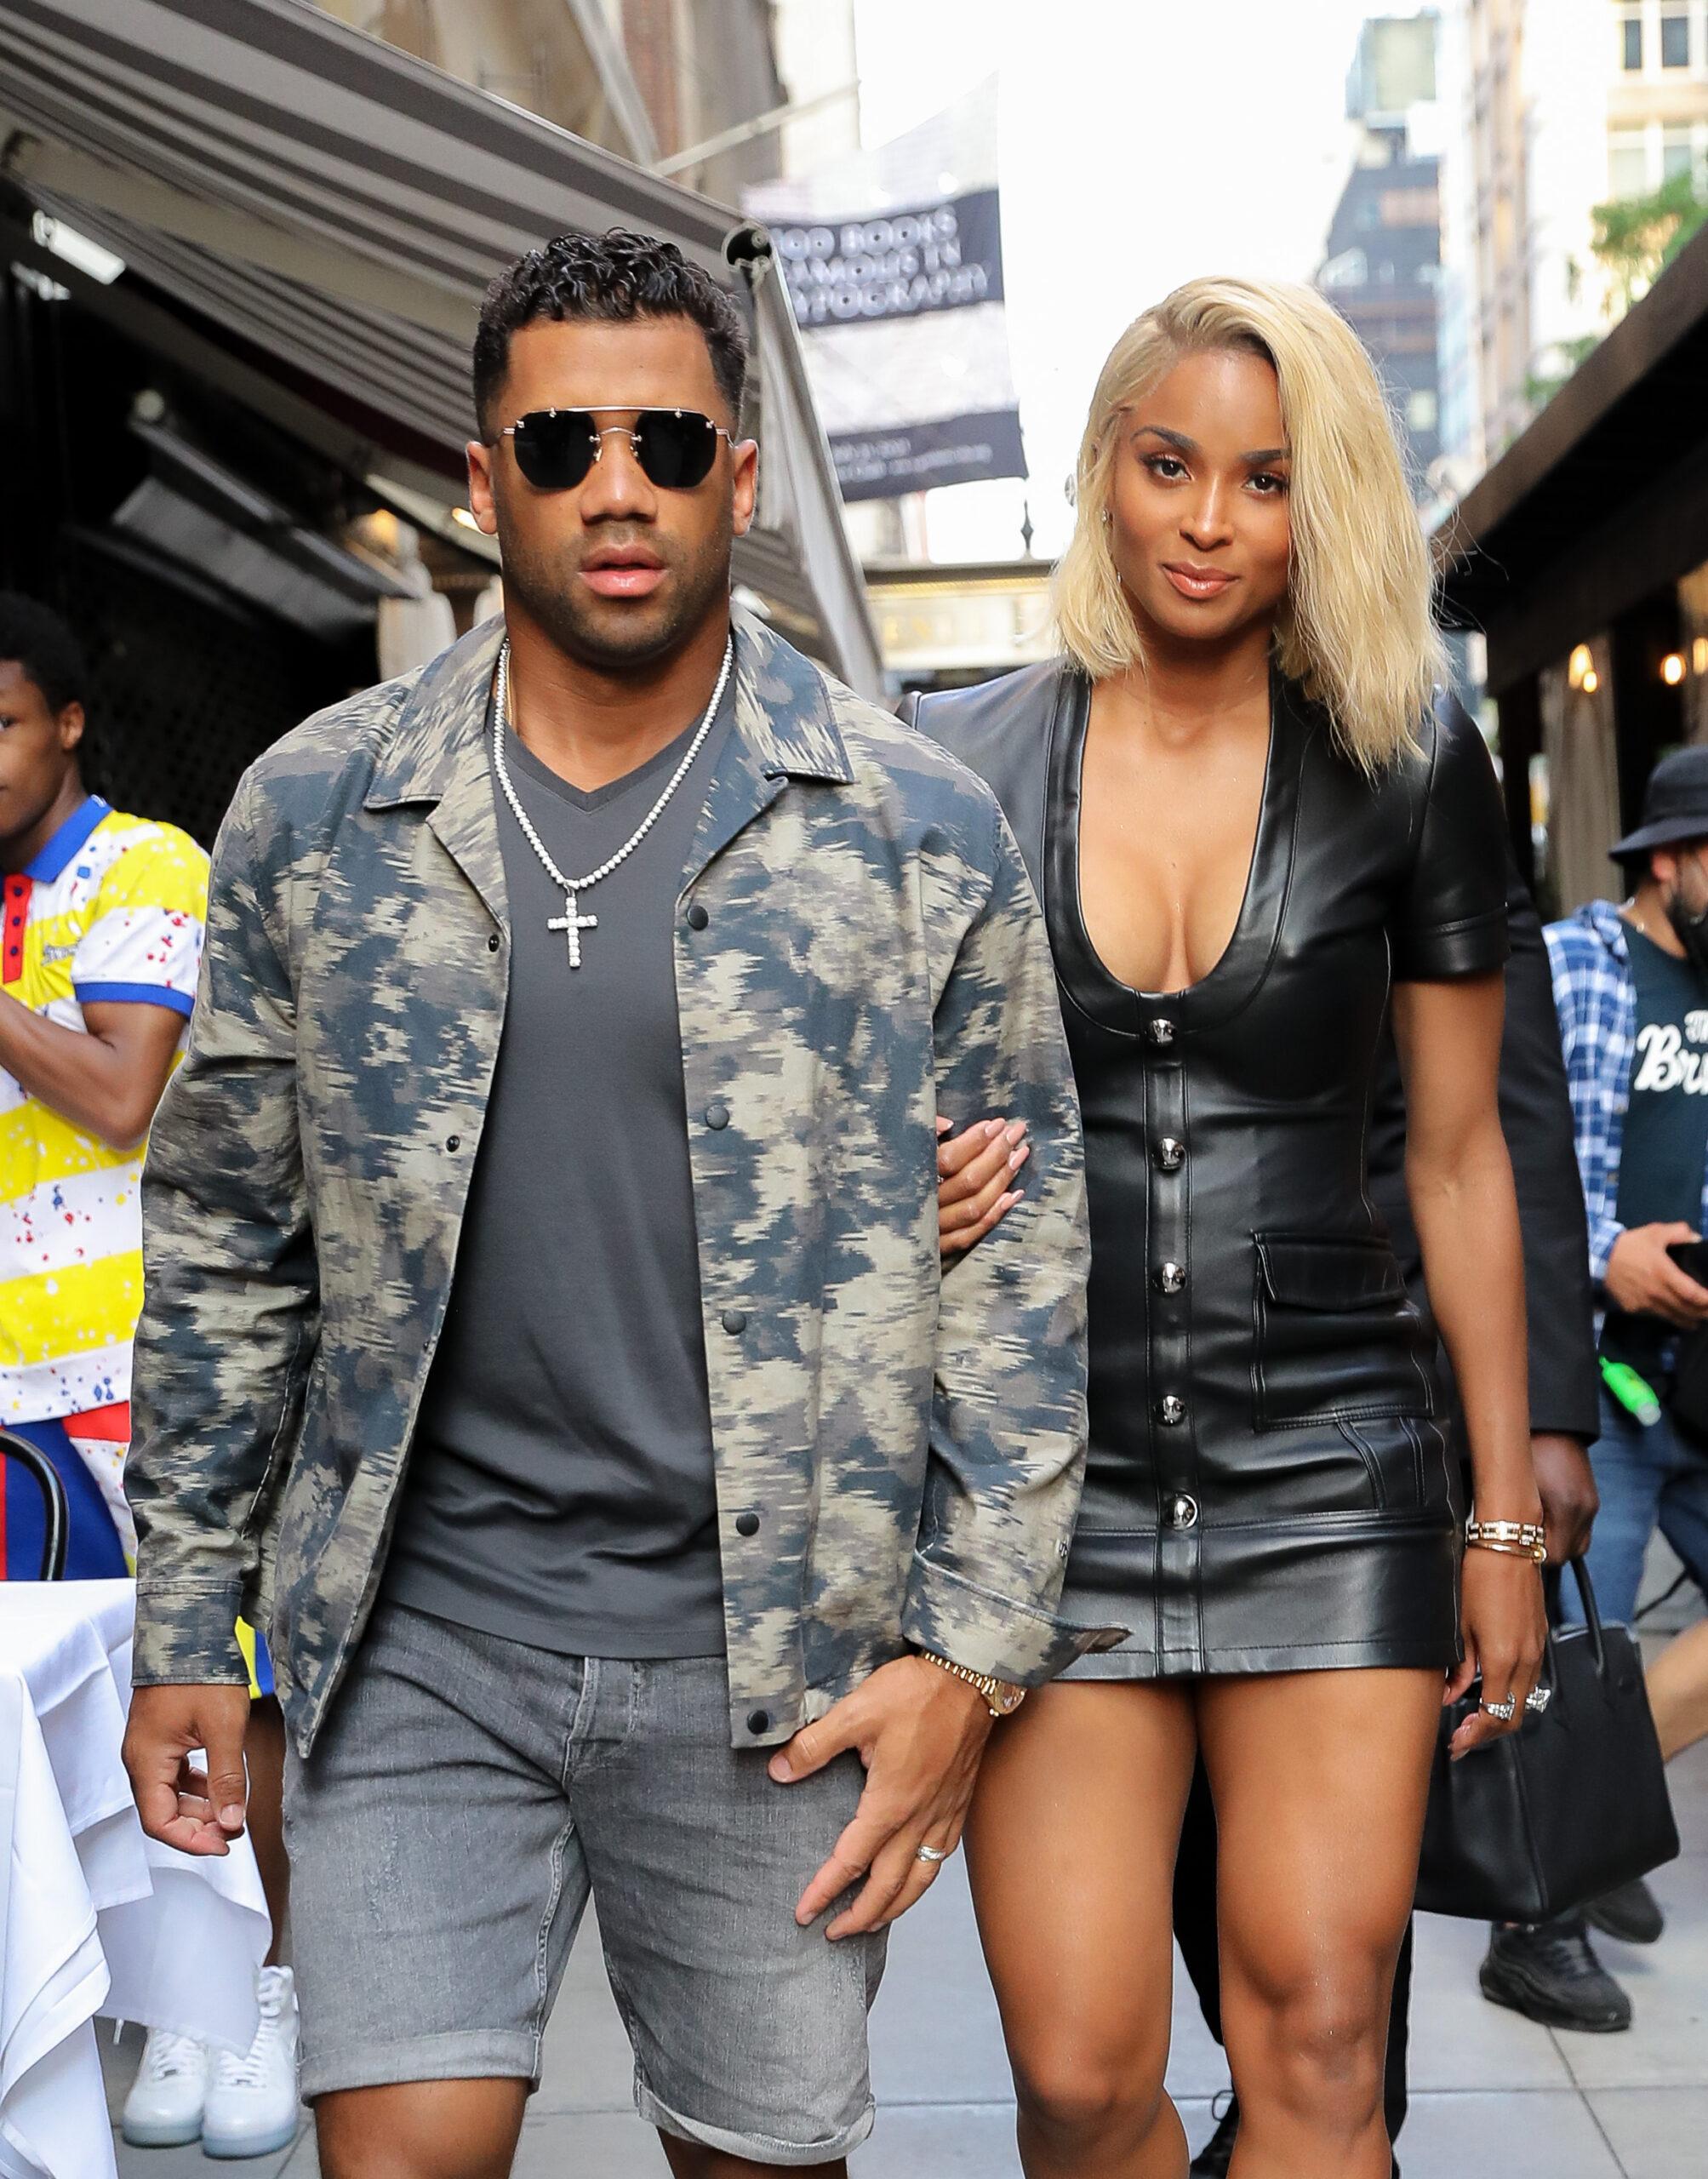 Ciara and Russell Wilson were spotted arm-in-arm while arriving at Philippe Chow for dinner in NYC